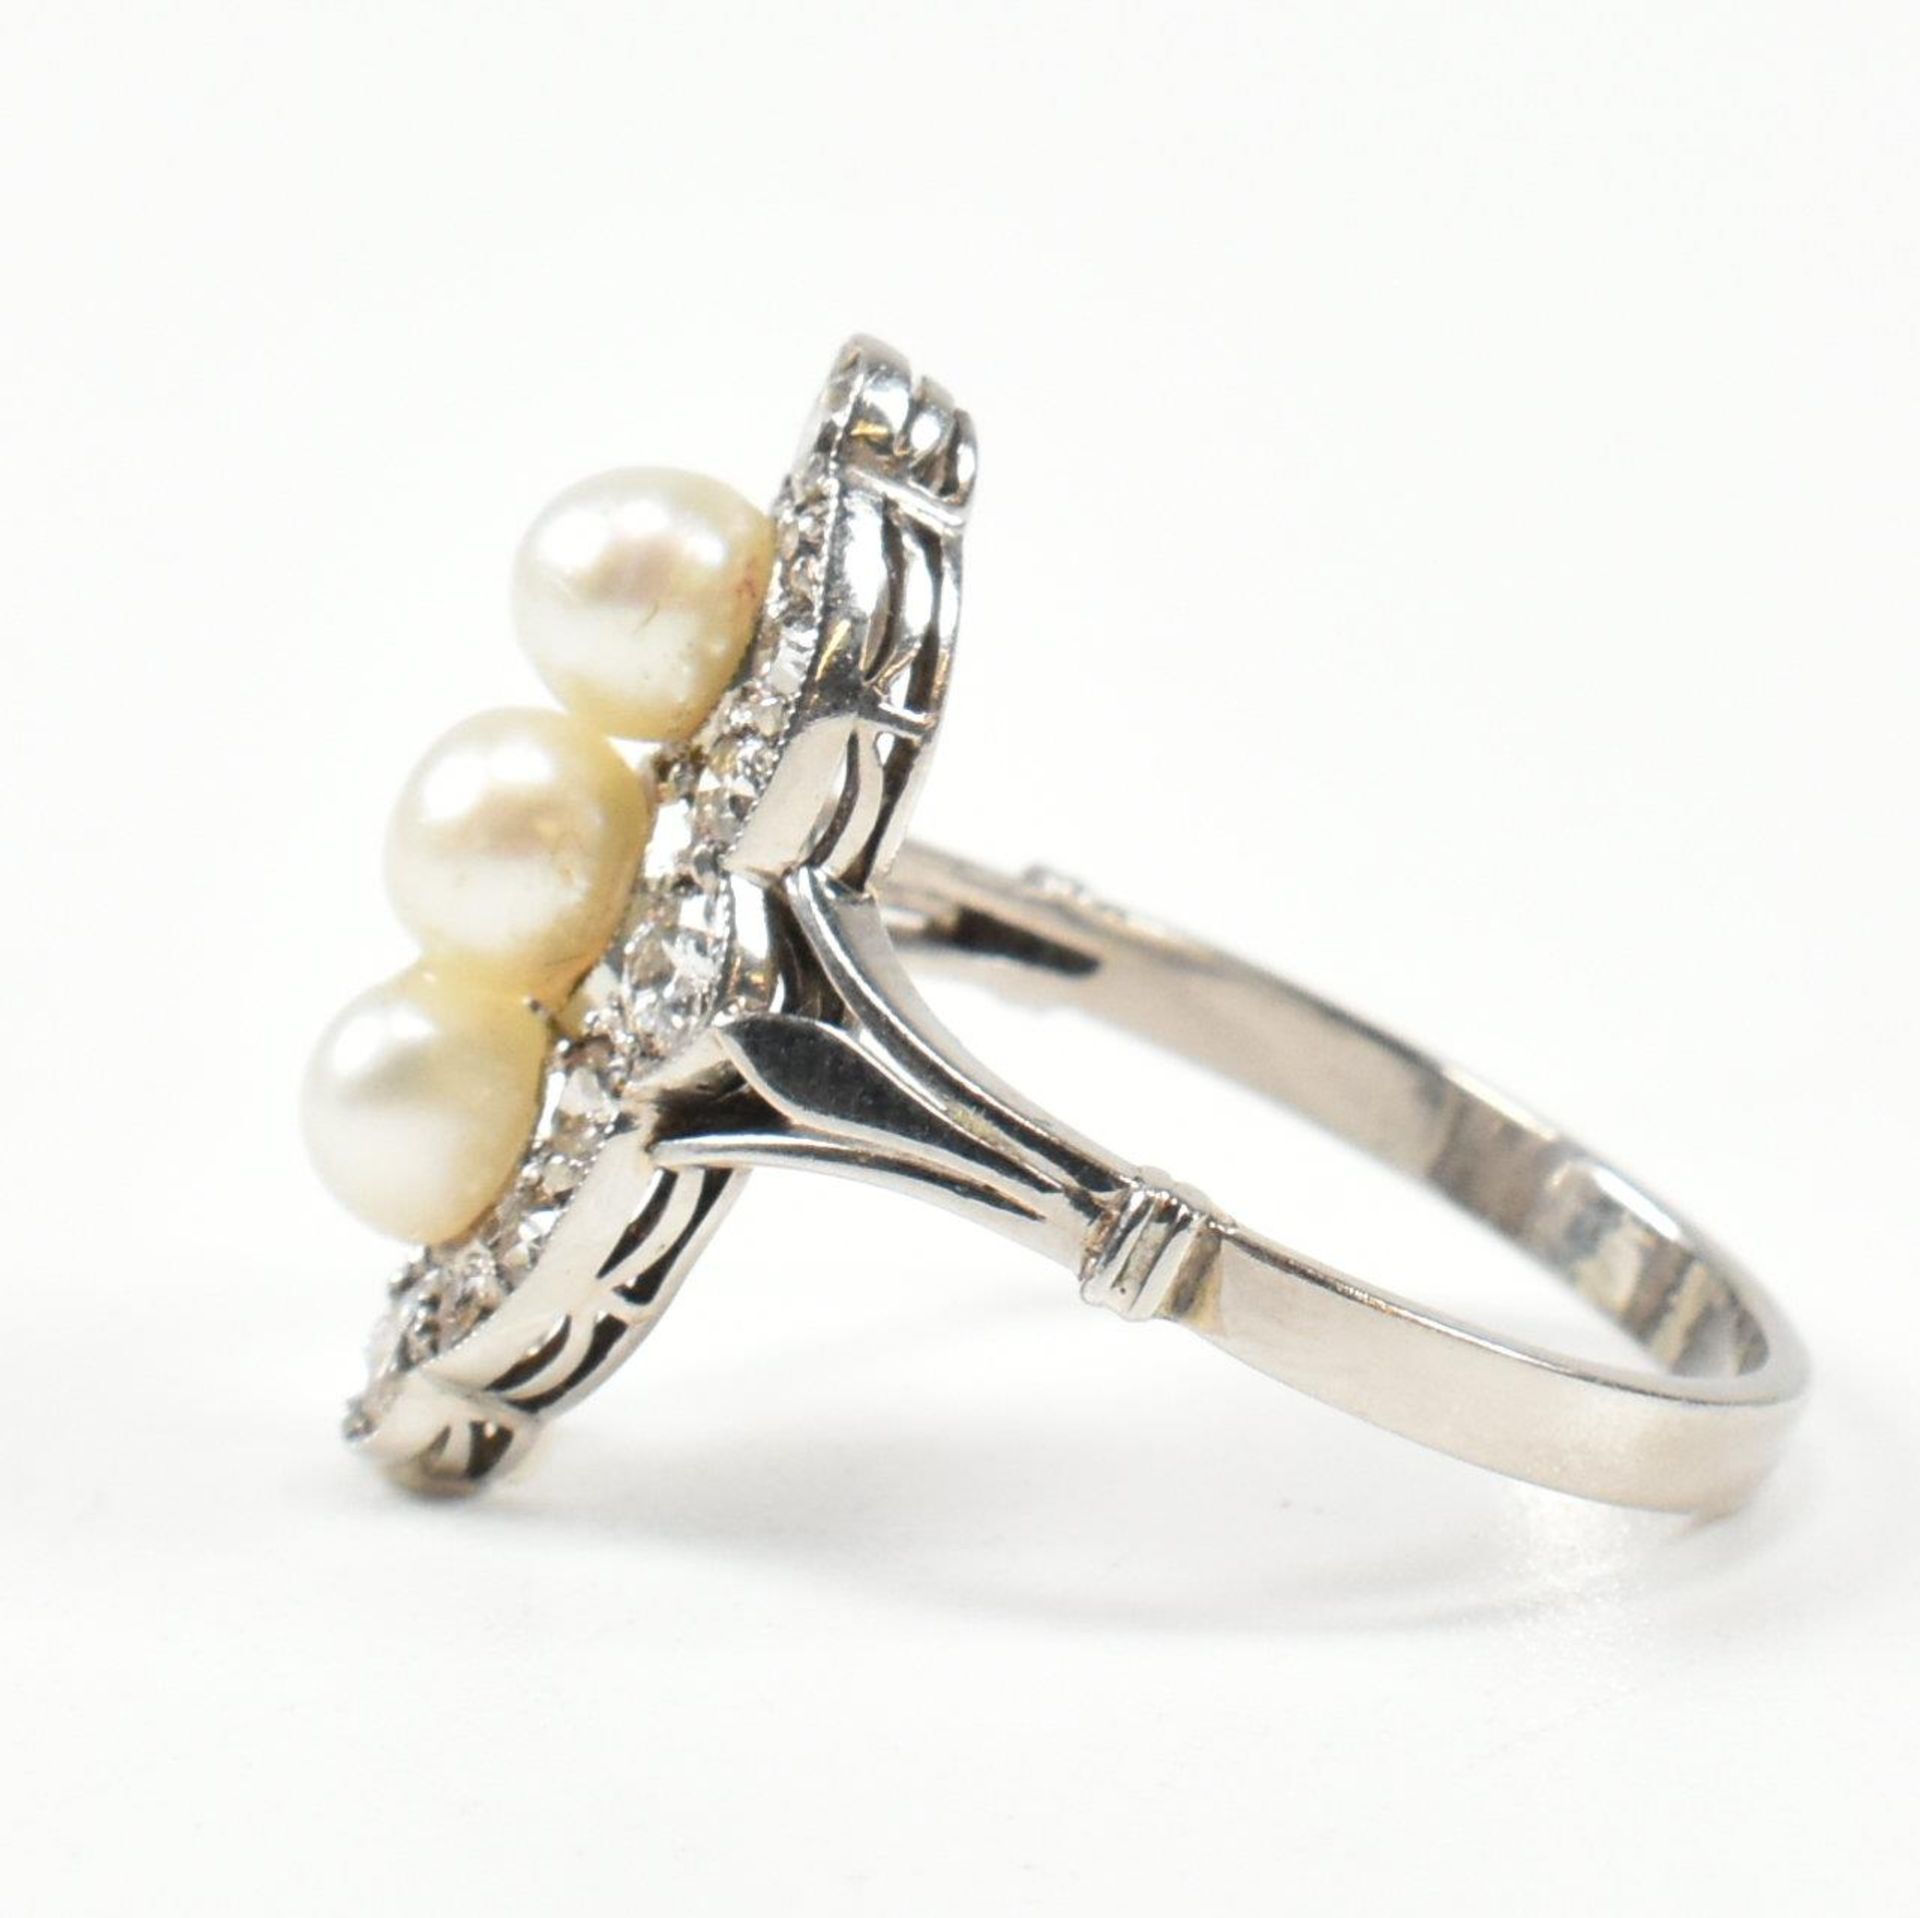 CASED PEARL & DIAMOND MARQUISE RING - Image 5 of 6